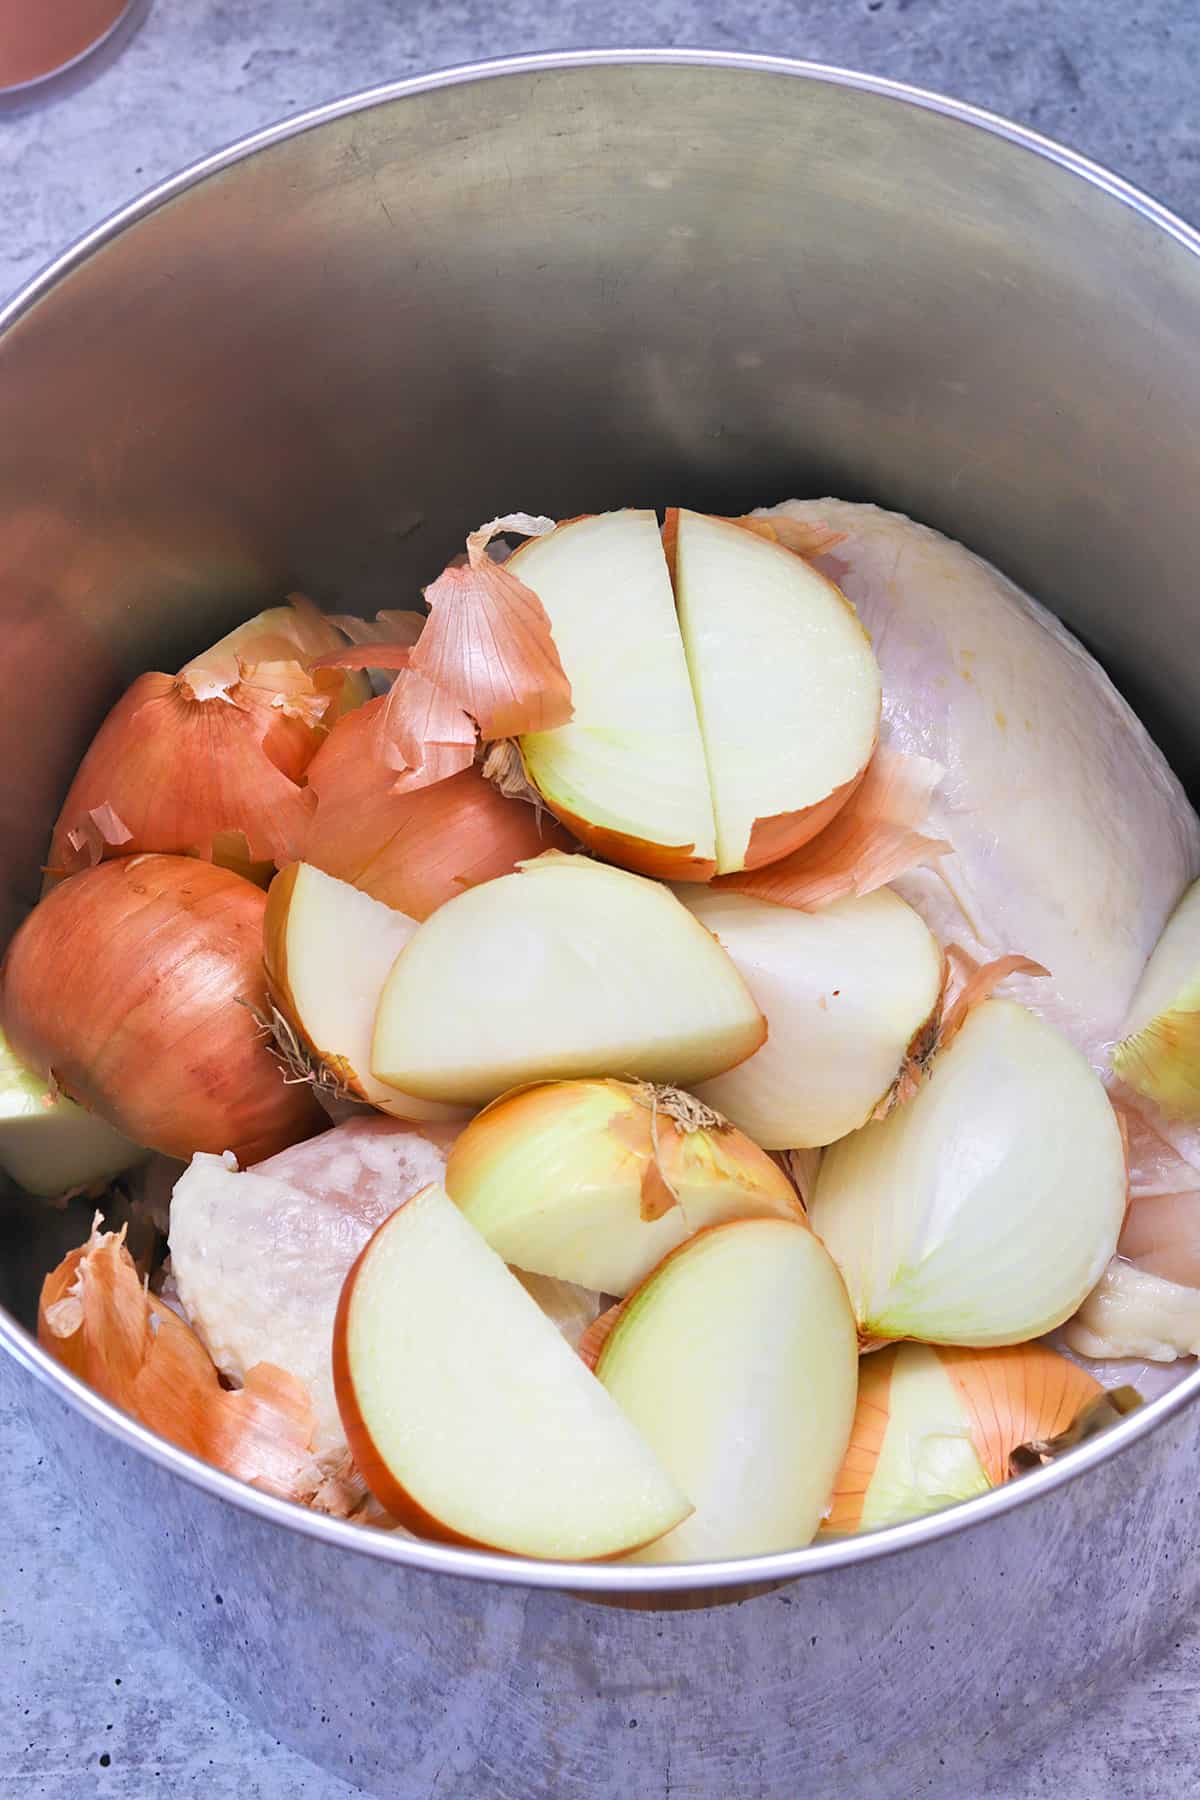 Making Chicken Stock - add quartered onions to pot with chicken pieces